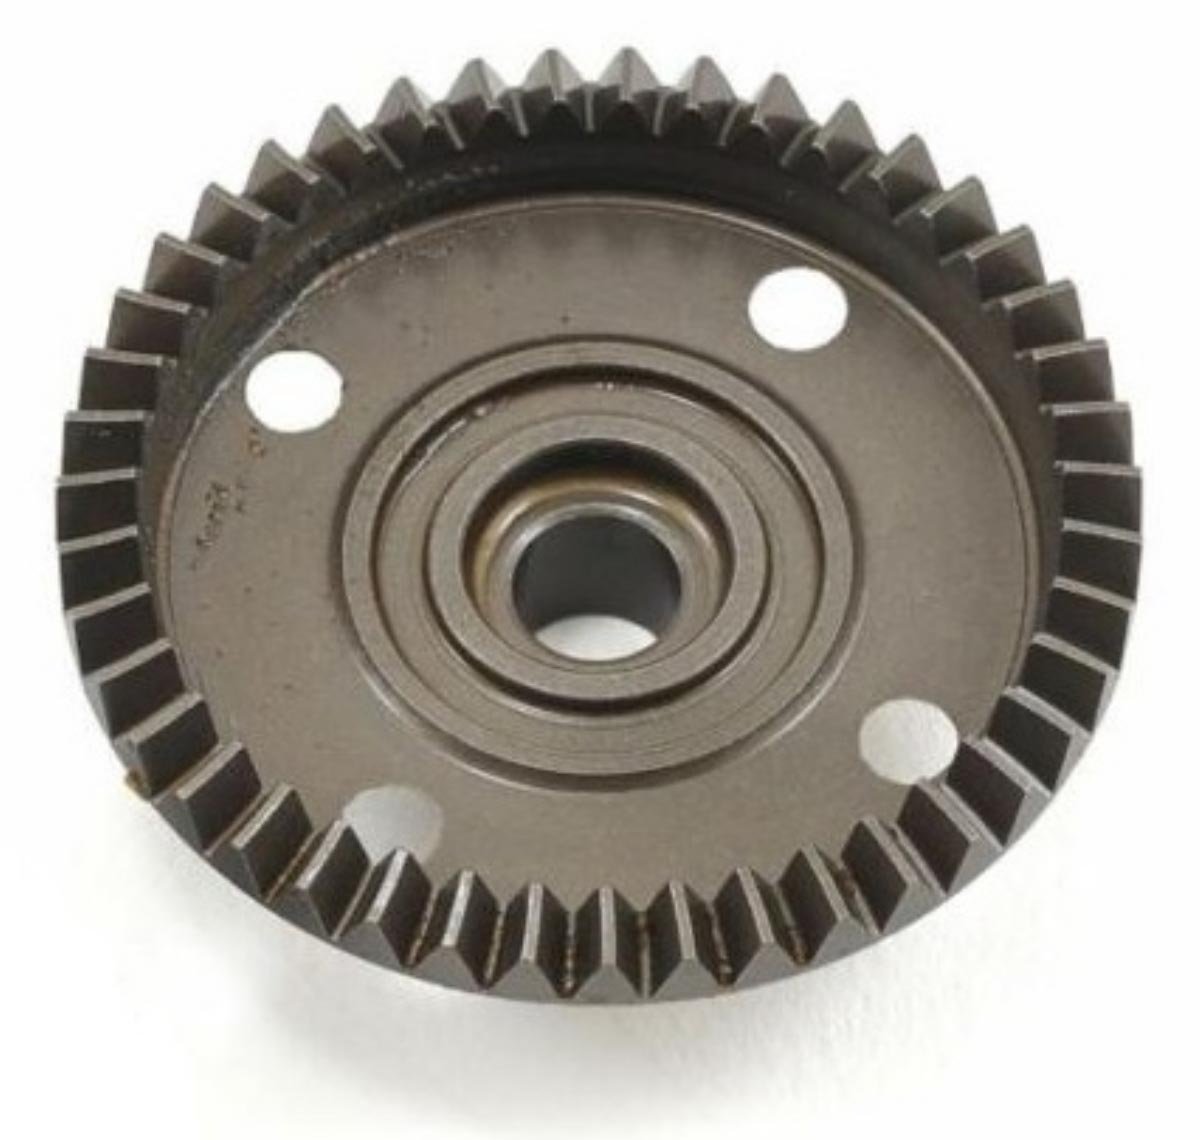 HB Racing D8 43T Differential Ring Gear